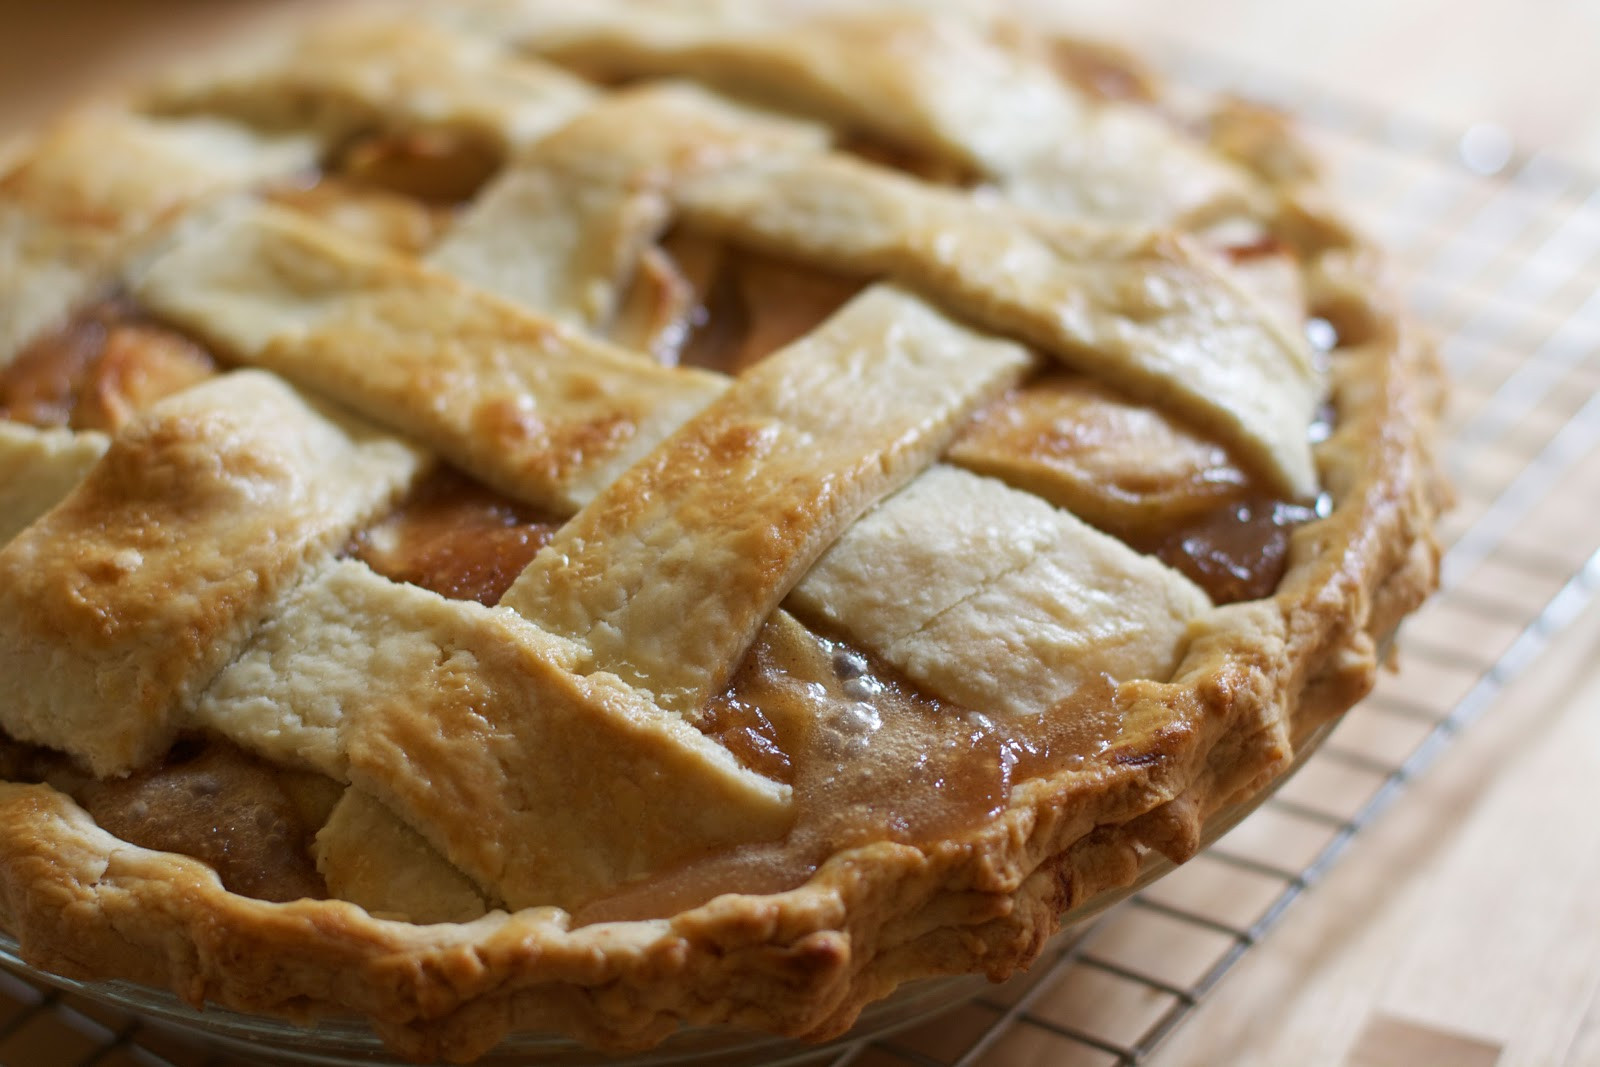 How To Make Apple Pie
 Video How to Make Apple Pie From Scratch with Susan Odom